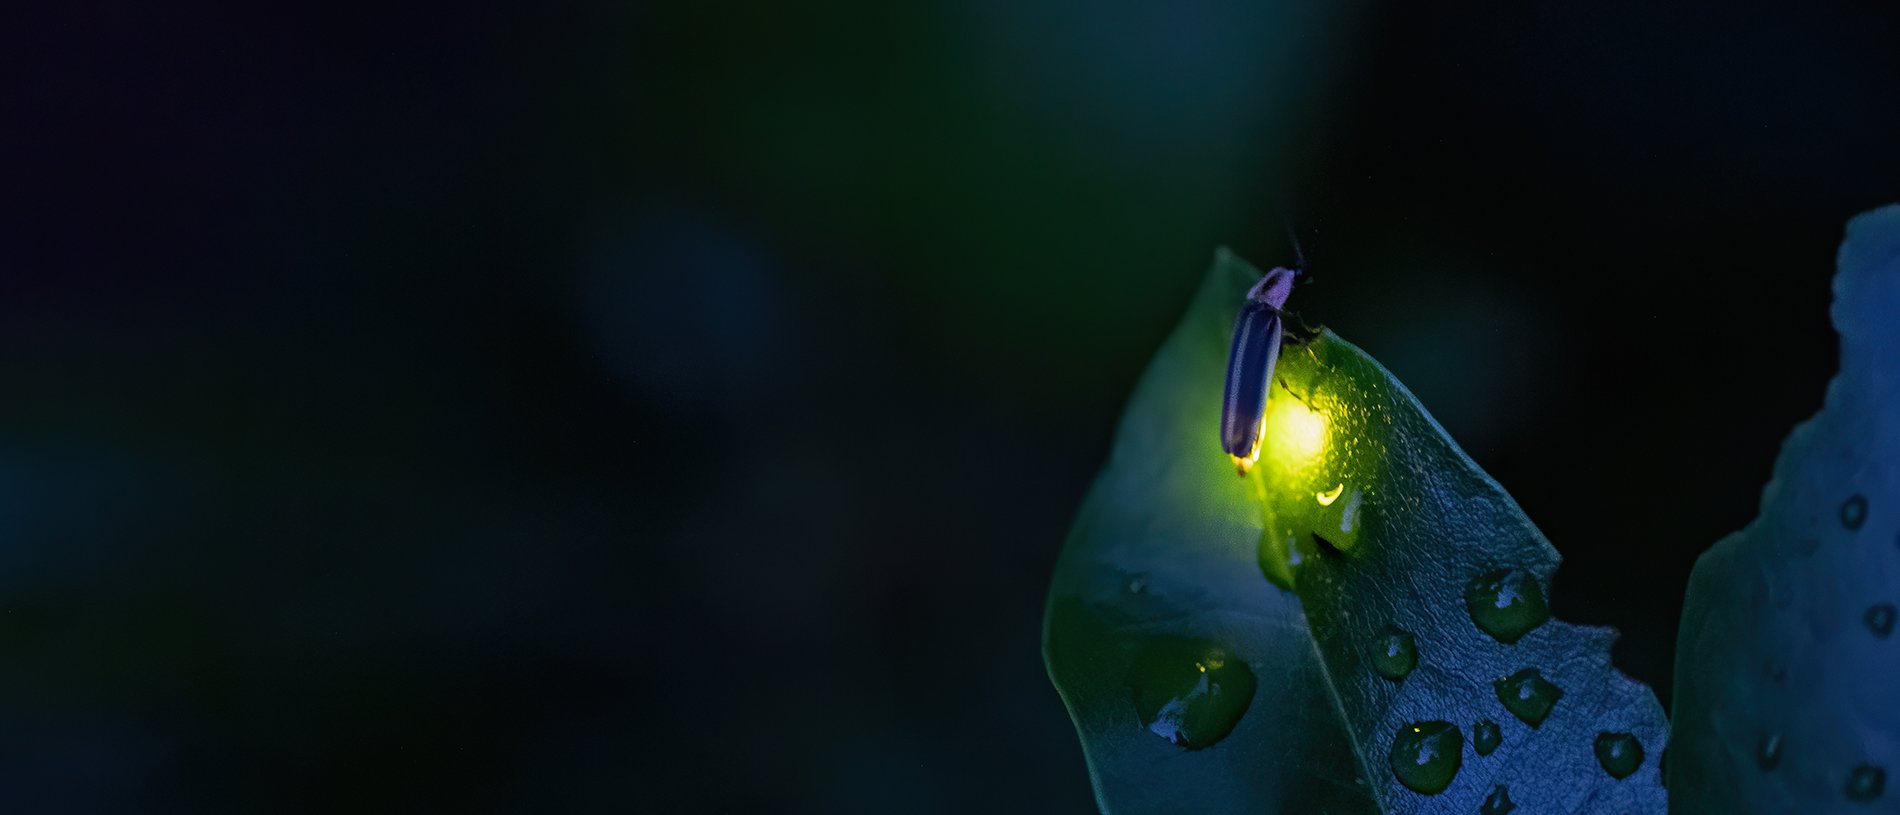 Dark image with a flrefly lighting up a wet leaf